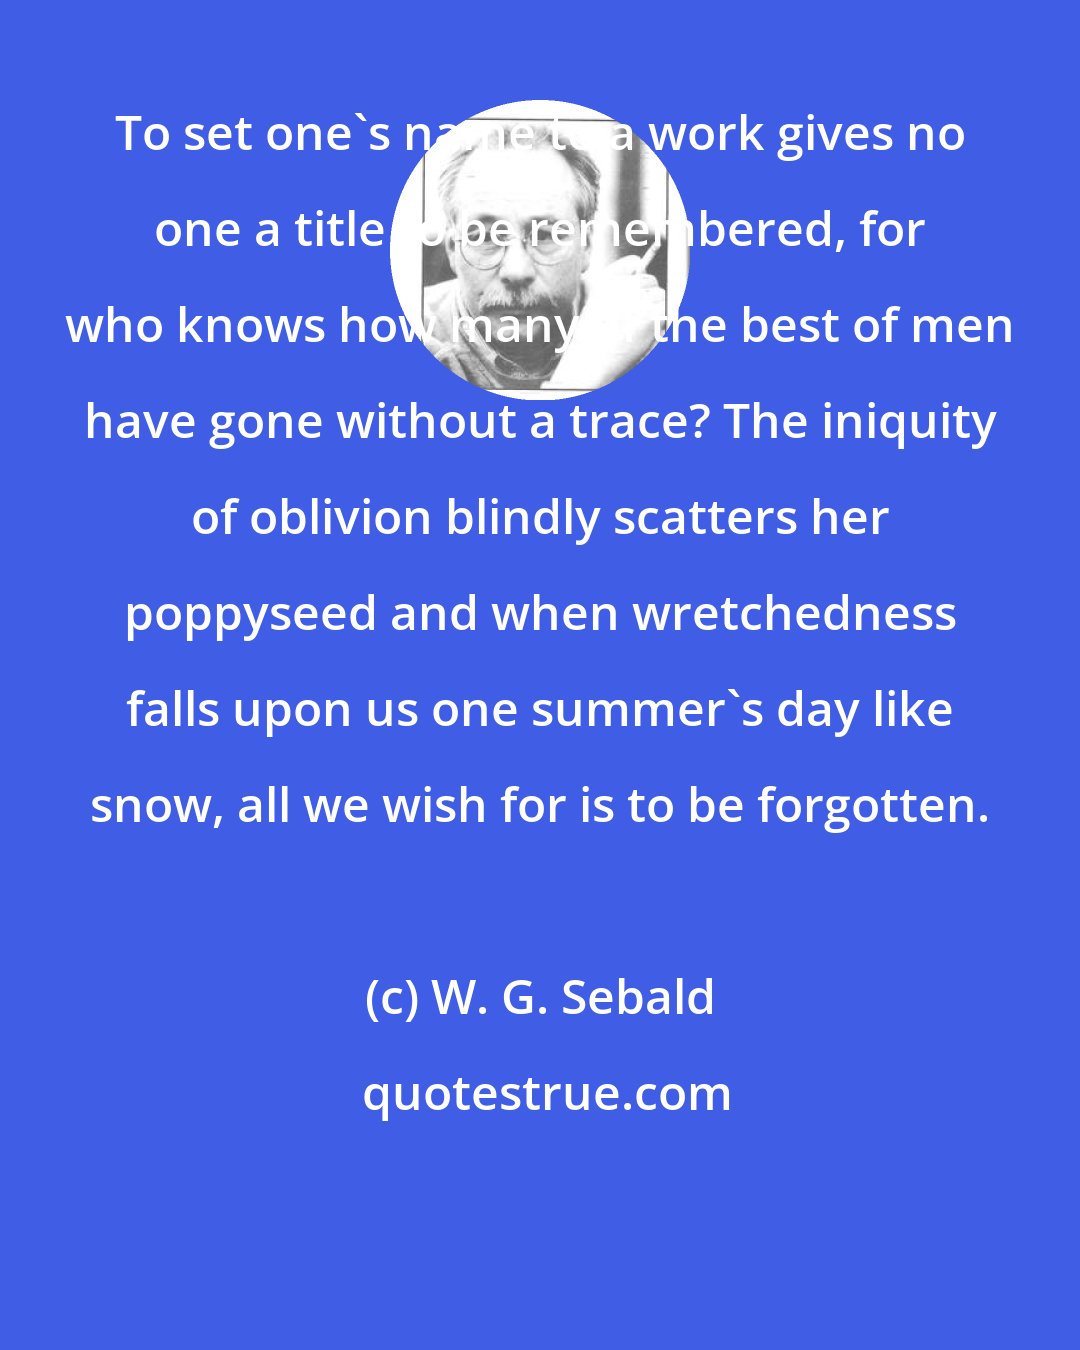 W. G. Sebald: To set one's name to a work gives no one a title to be remembered, for who knows how many of the best of men have gone without a trace? The iniquity of oblivion blindly scatters her poppyseed and when wretchedness falls upon us one summer's day like snow, all we wish for is to be forgotten.